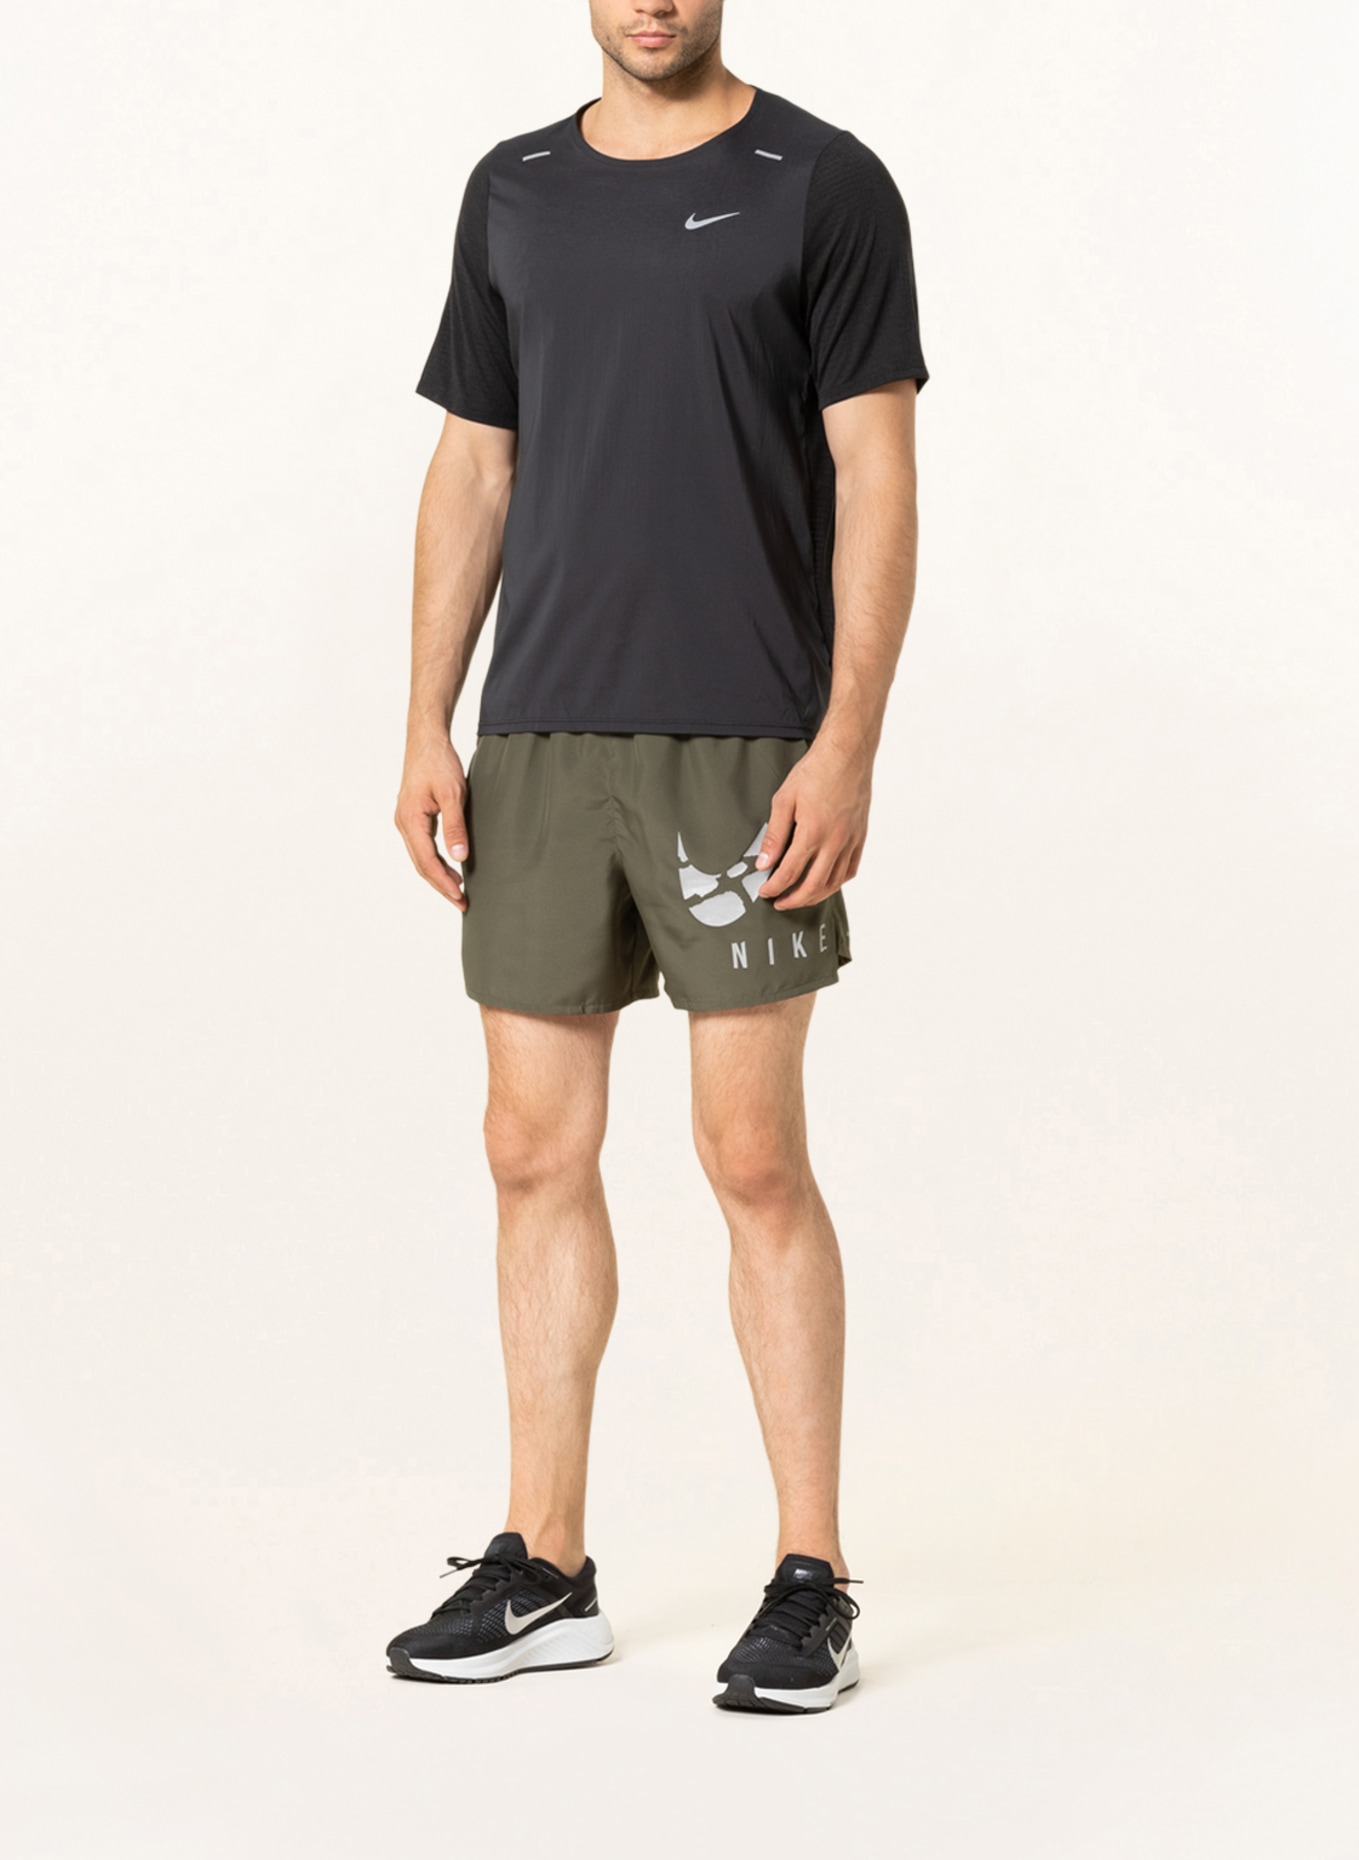 Nike 2-in-1 running shorts DRI-FIT CHALLENGER RUN DIVISION, Color: OLIVE (Image 2)